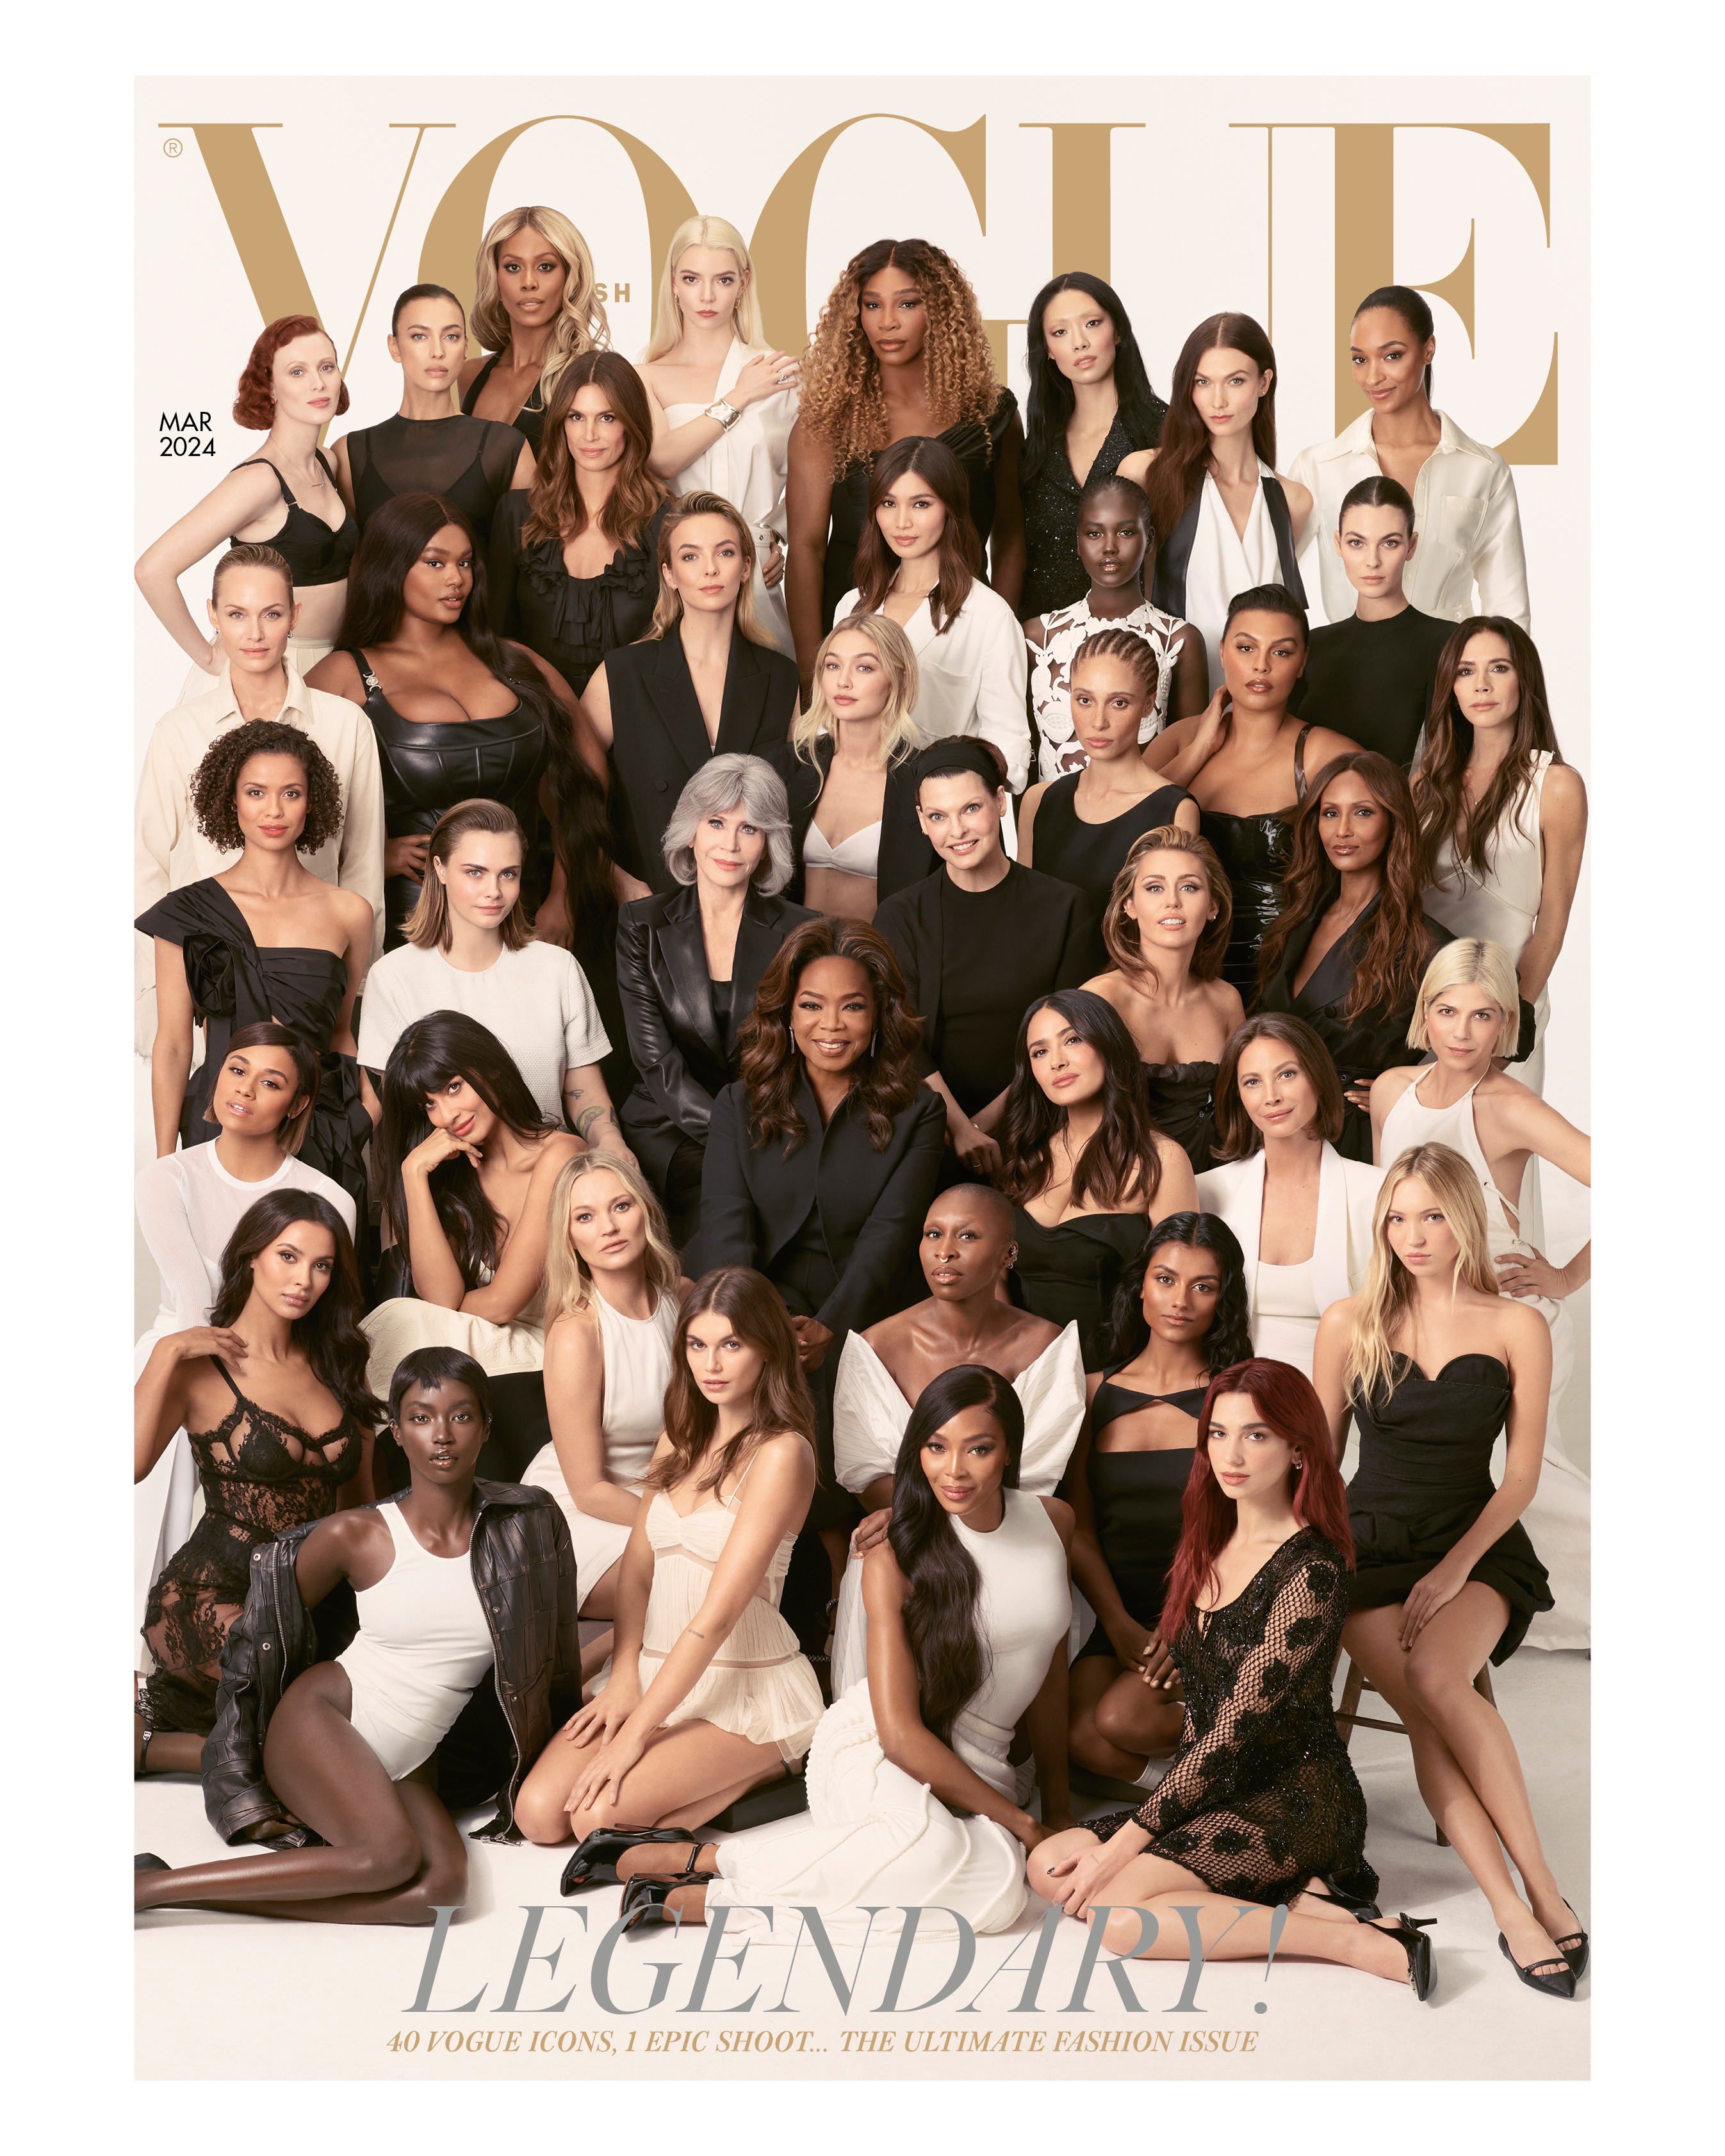 Image shows 40 women of varying ages and ethnicities gathered before a white studio backdrop. All are dressed in black, white or a combination of the two, and are looking into the camera. The four women at the front are sitting on the floor, and the rest are behind, arranged in rows that increase in height, so that all 40 are visible. Above their heads, the Vogue logo in gold letters. The cover line reads: “Legendary! 40 Vogue icons, one epic shoot... the ultimate fashion issue.”